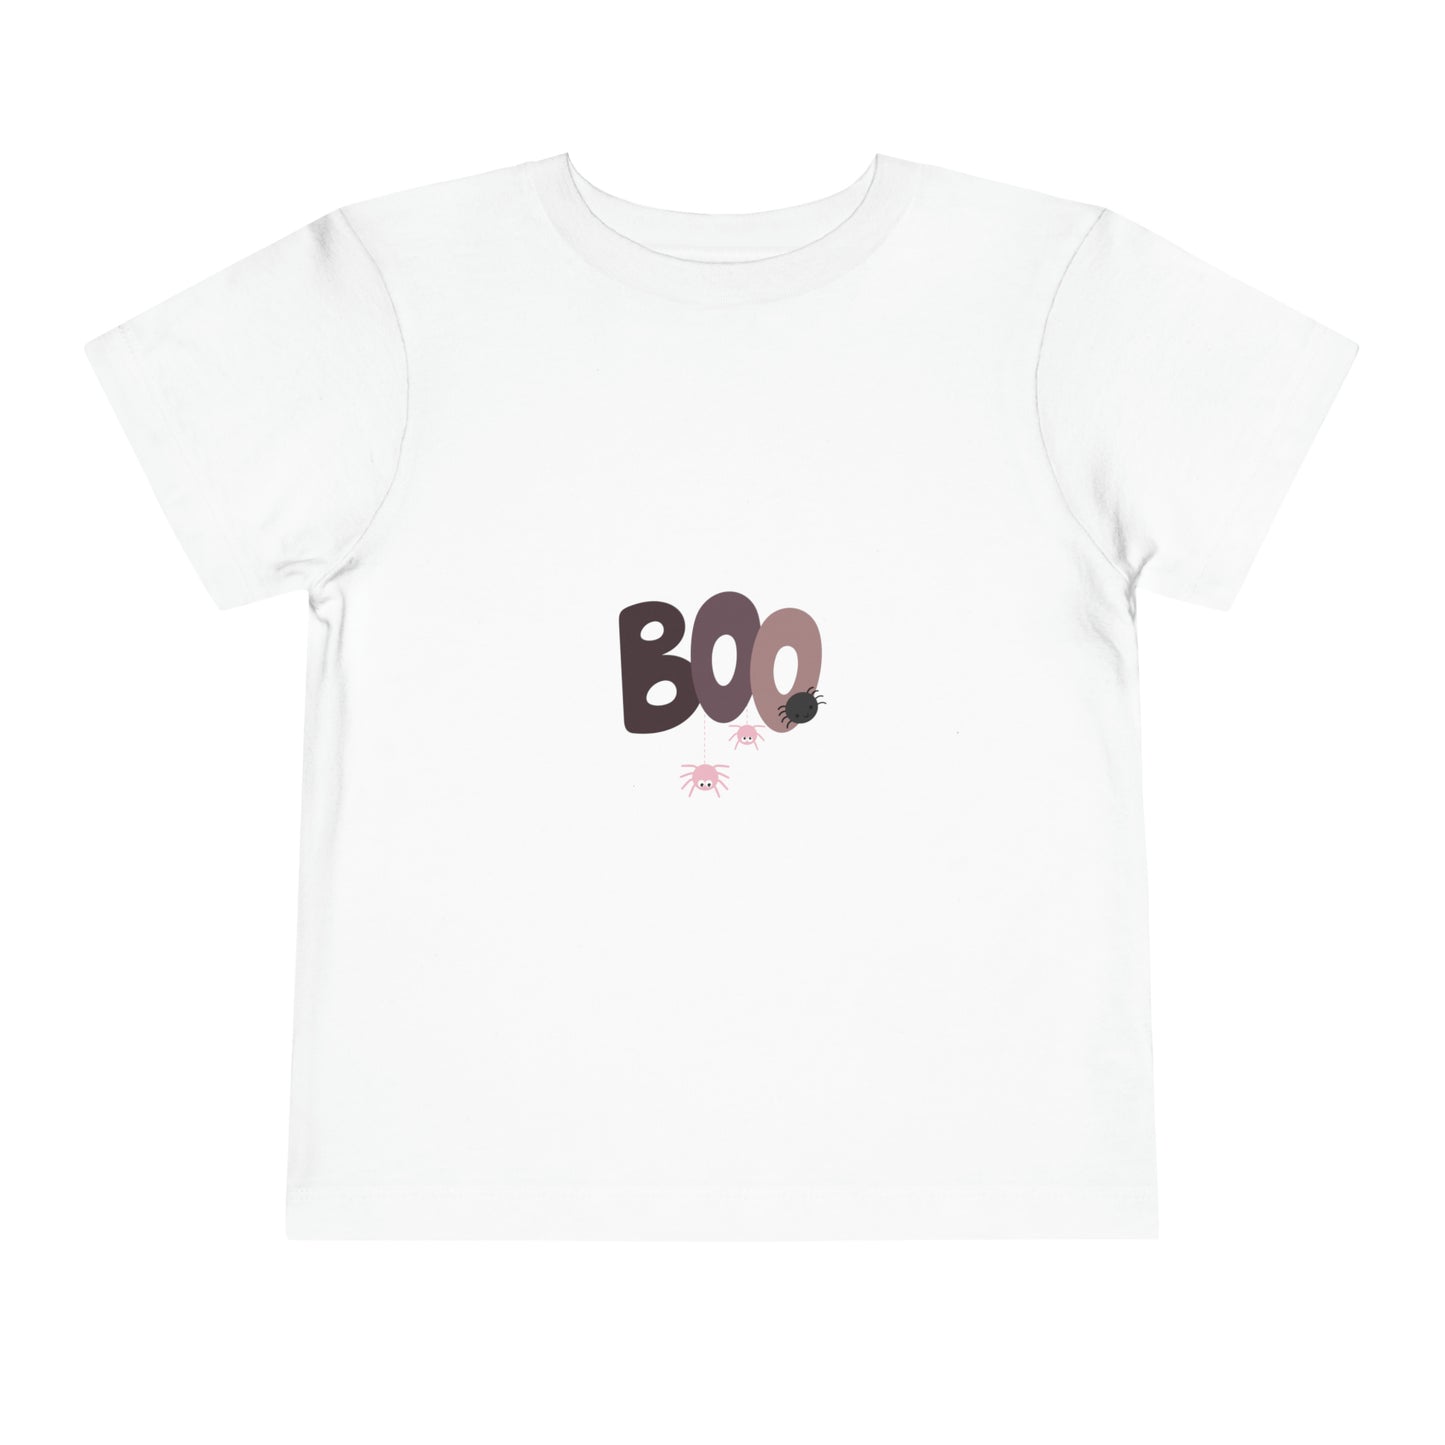 "Adorable Toddler Short Sleeve Tee with a Spooky Twist – Explore Our Collection of Halloween-Inspired Kids' Apparel for Your Little BOO!"